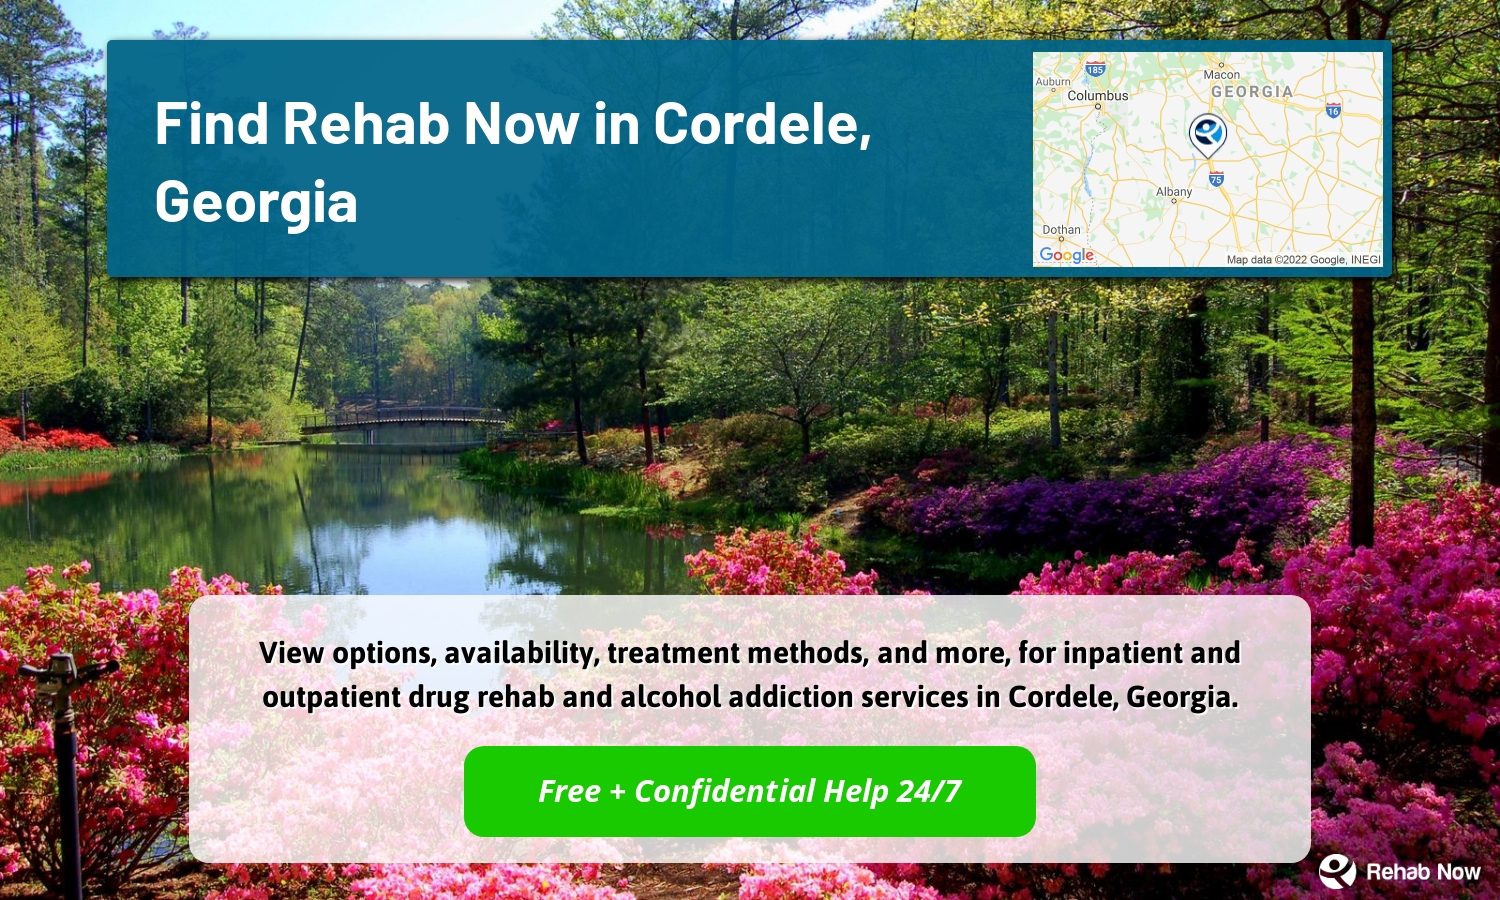 View options, availability, treatment methods, and more, for inpatient and outpatient drug rehab and alcohol addiction services in Cordele, Georgia.